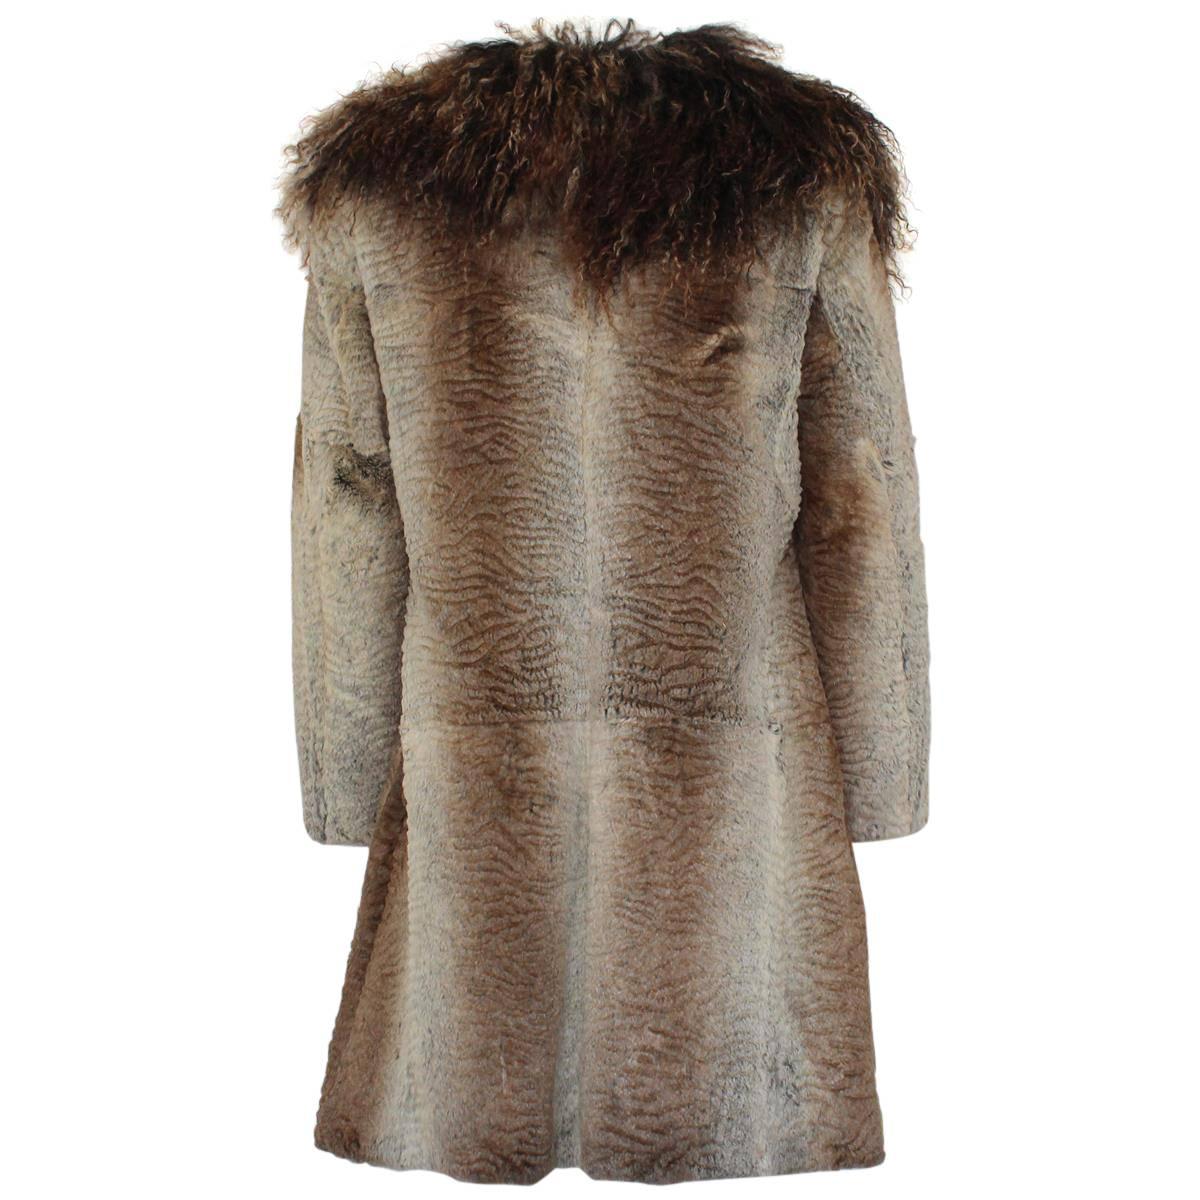 Beautiful lapin fur coat !
Shaded lapin fur
Different shades of beige
Mongolia collar (removable)
Authomatic buttons closure
2 Pockets
Total length from shoulder cm 78 (30.7 inches)
Worldwide express shipping included in the price !